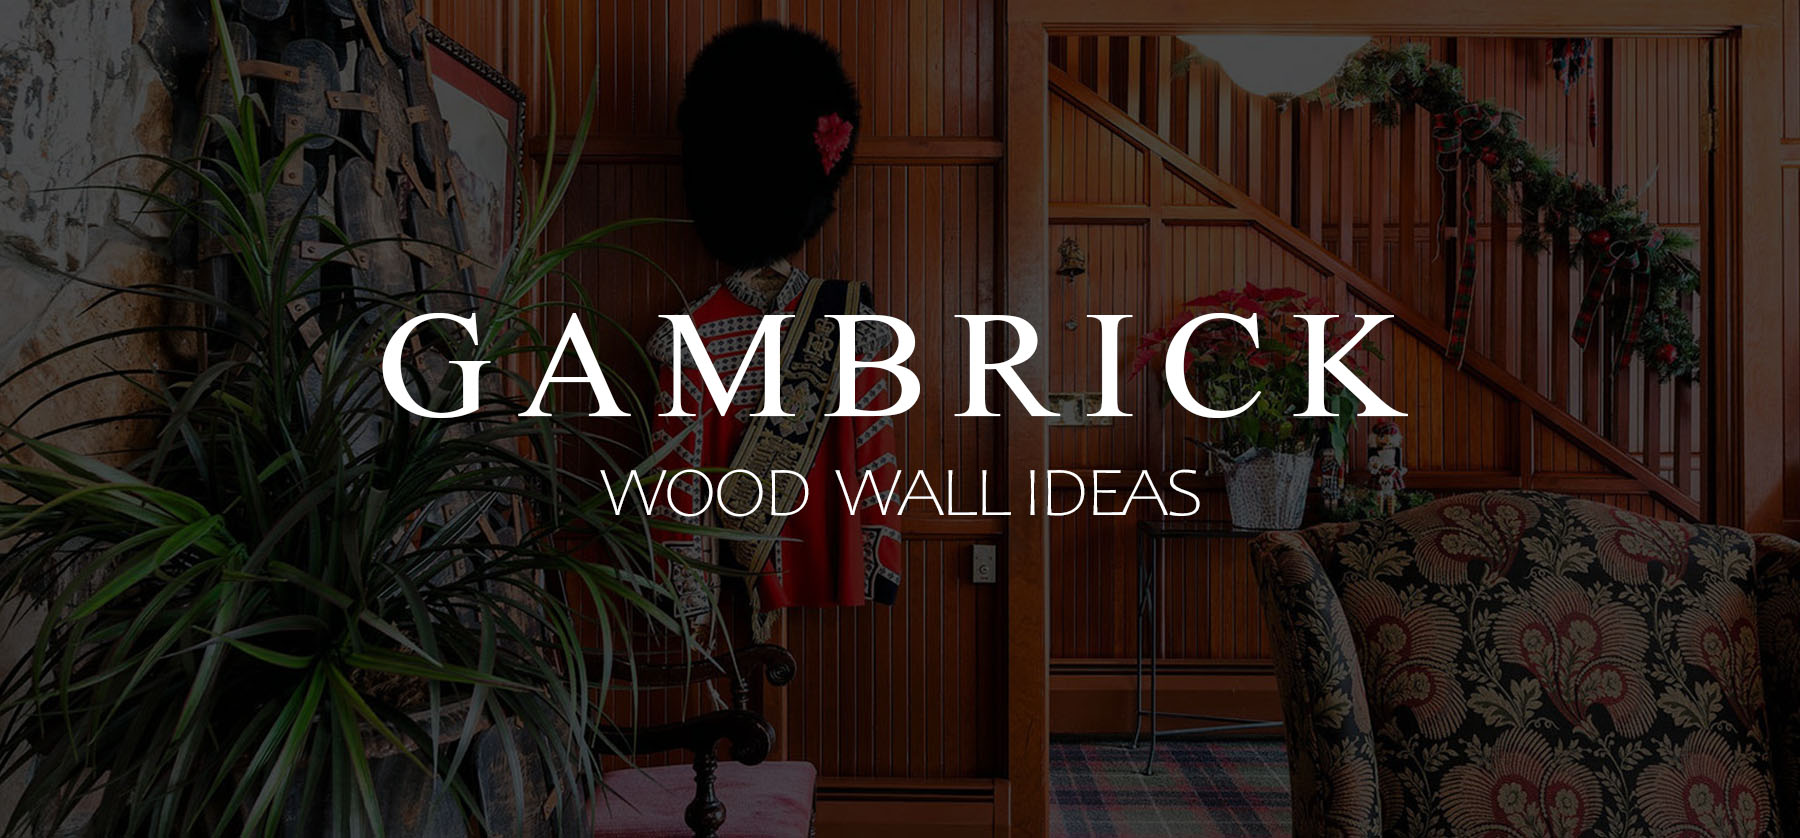 wood wall ideas banner pic